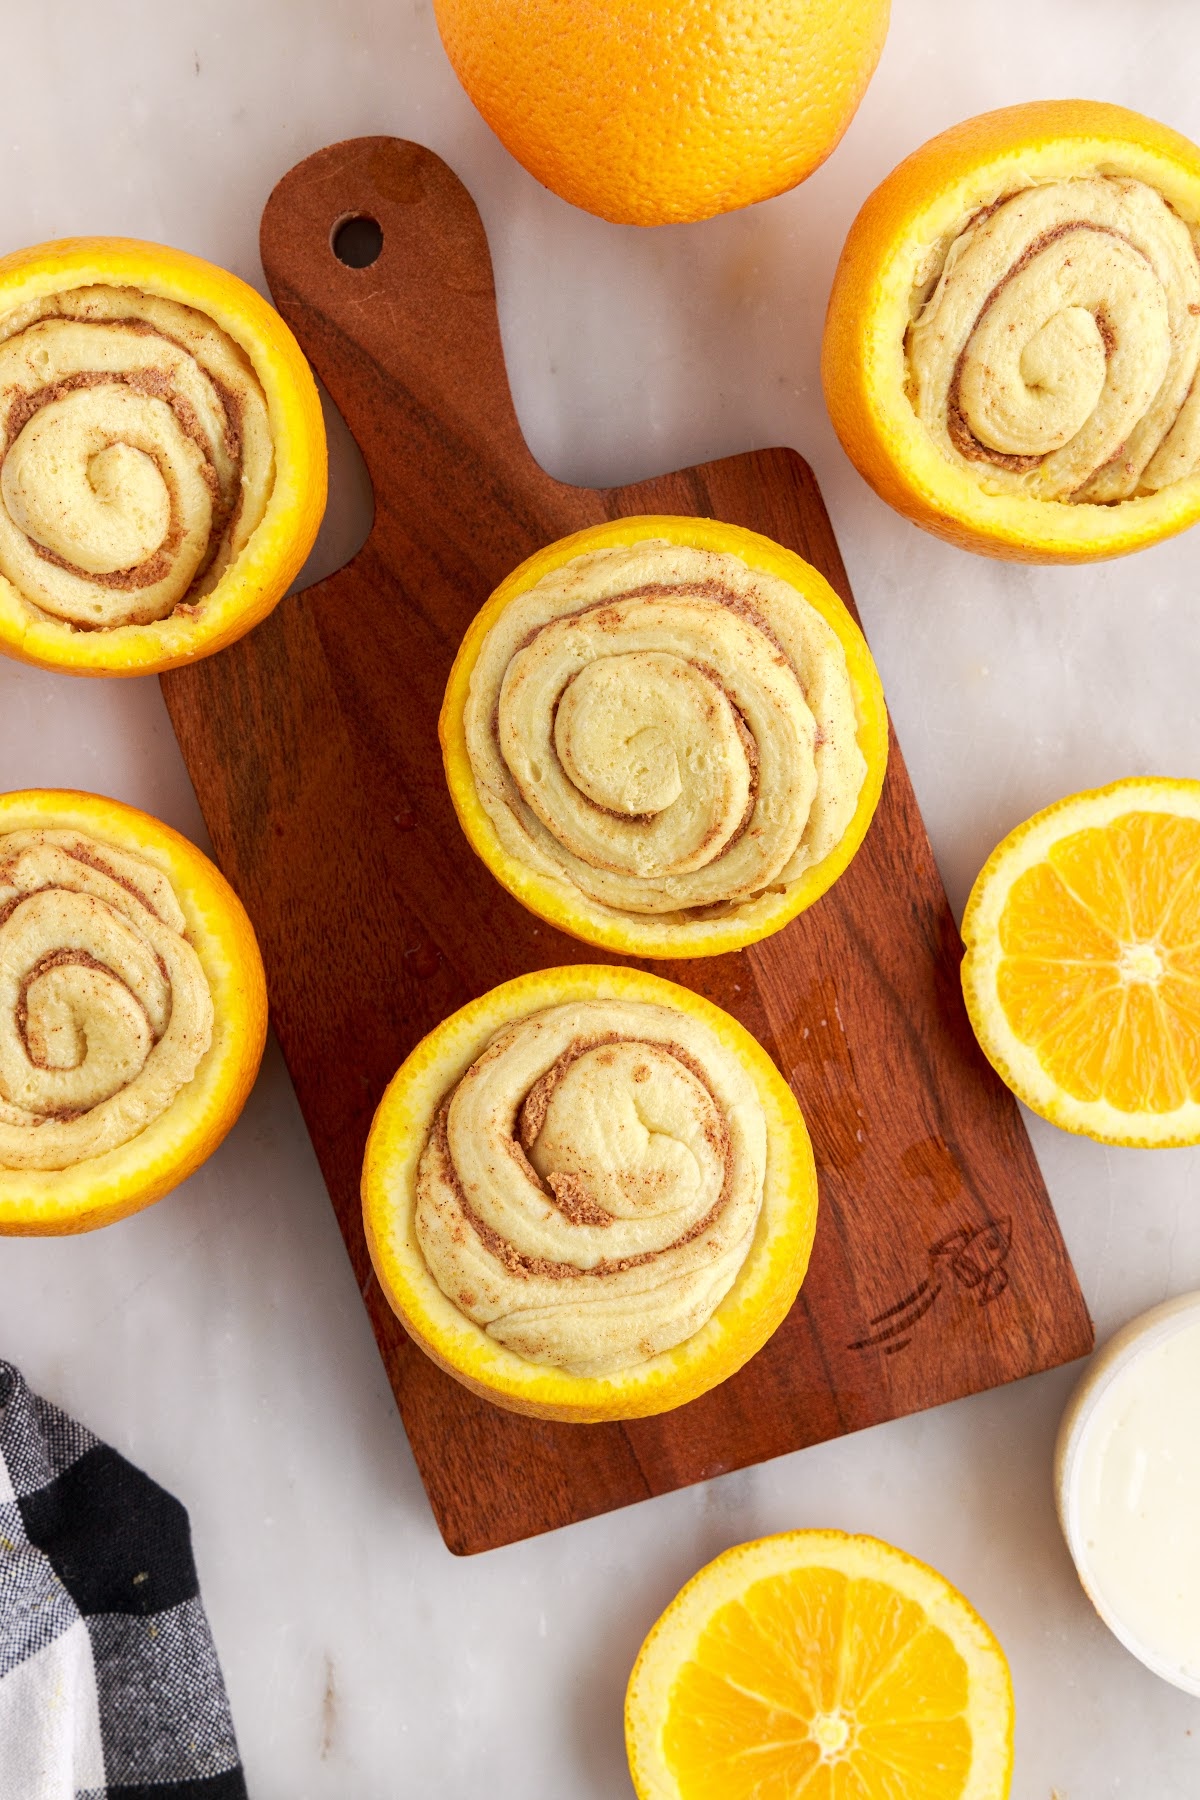 Hollowed out oranges with raw cinnamon rolls stuffed inside.